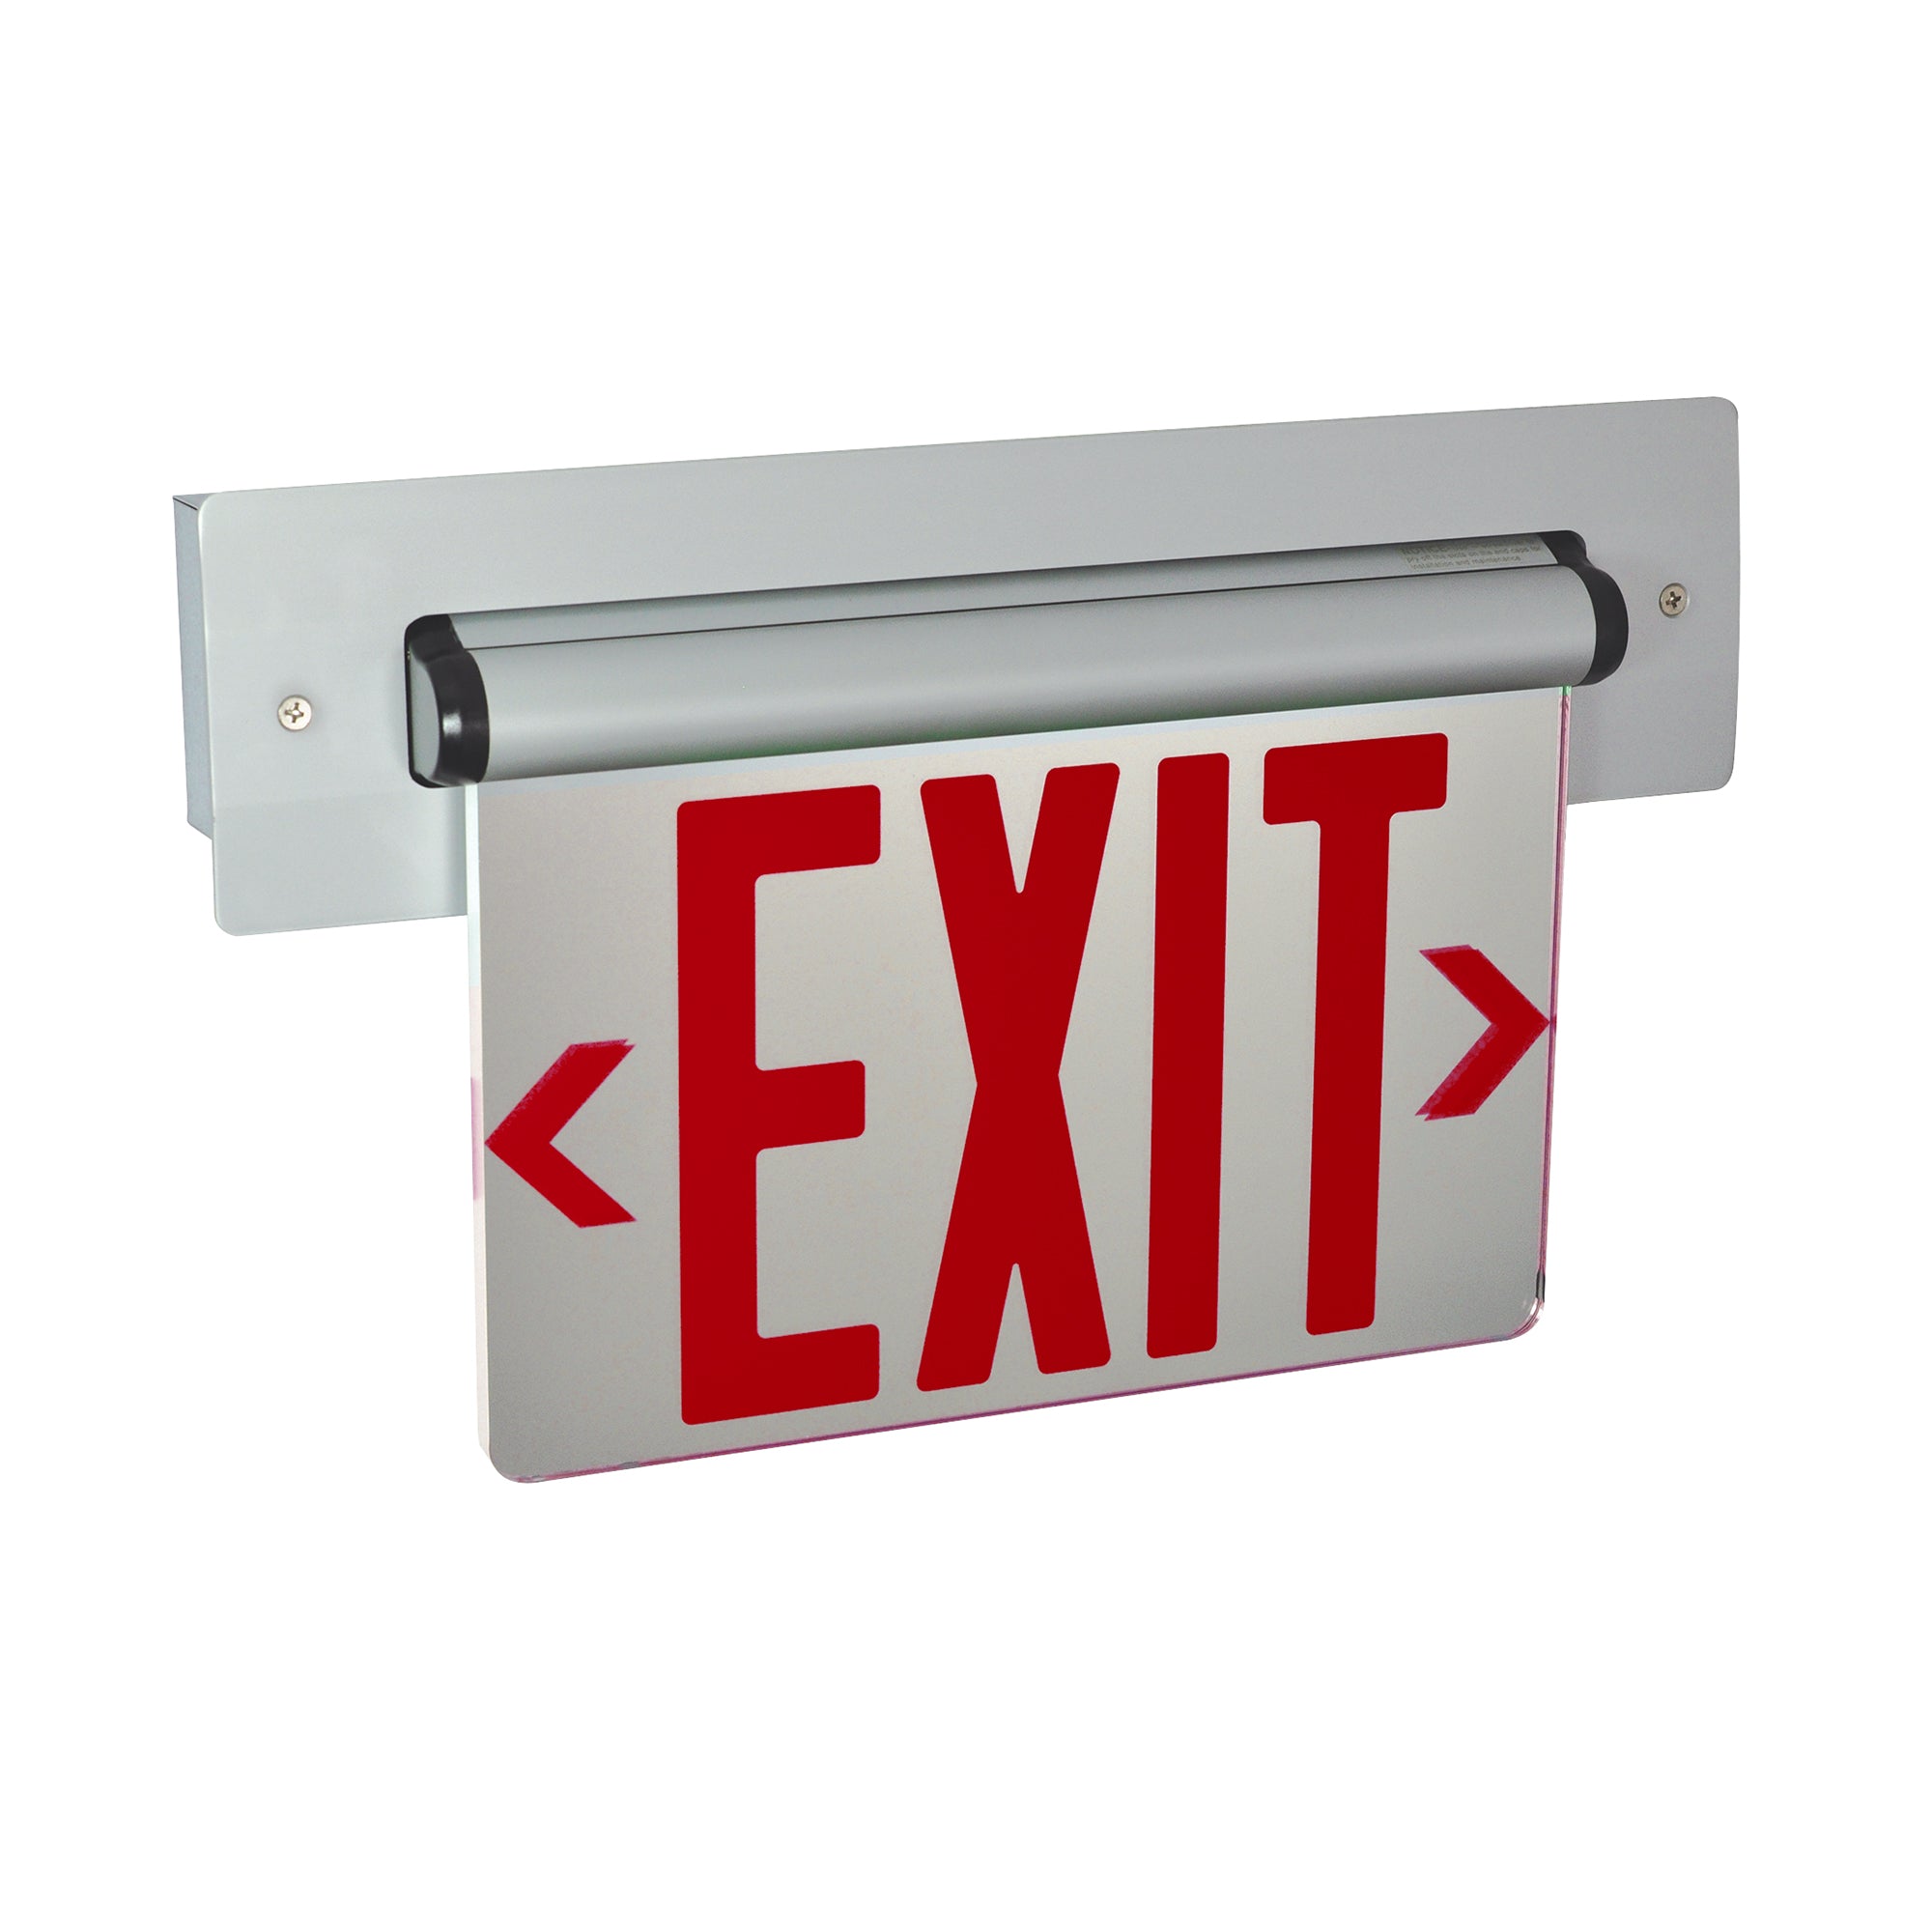 Nora Lighting NX-815-LEDR2MA - Exit / Emergency - Recessed Adjustable LED Edge-Lit Exit Sign, Battery Backup, 6 Inch Red Letters, Double Face / Mirrored Acrylic, Aluminum Housing